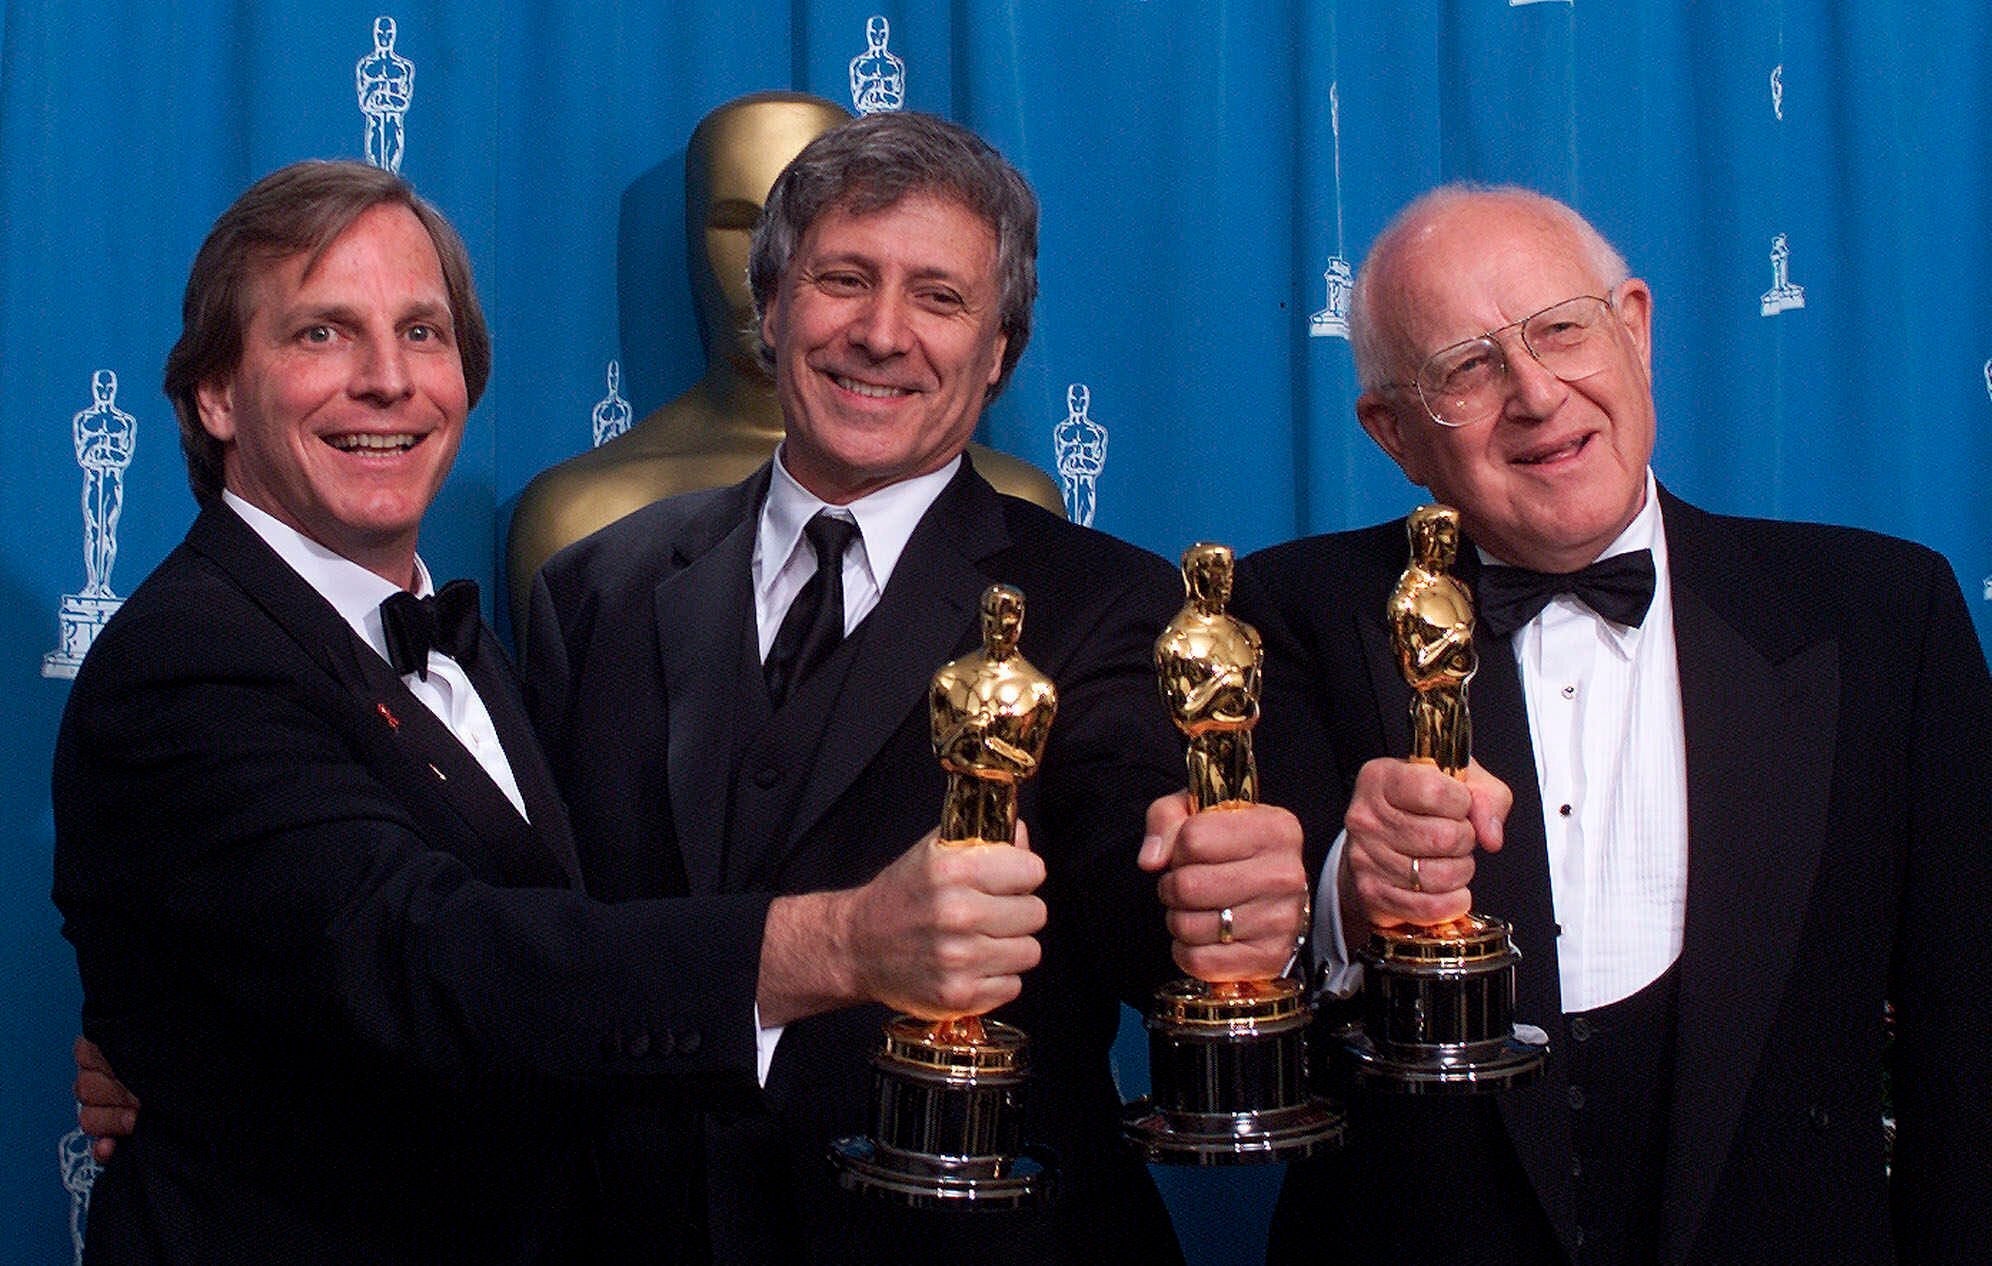 Lustig (right) at the 2001 Oscar ceremony with Douglas Wick and David Franzoni: they won their awards for ‘Gladiator’